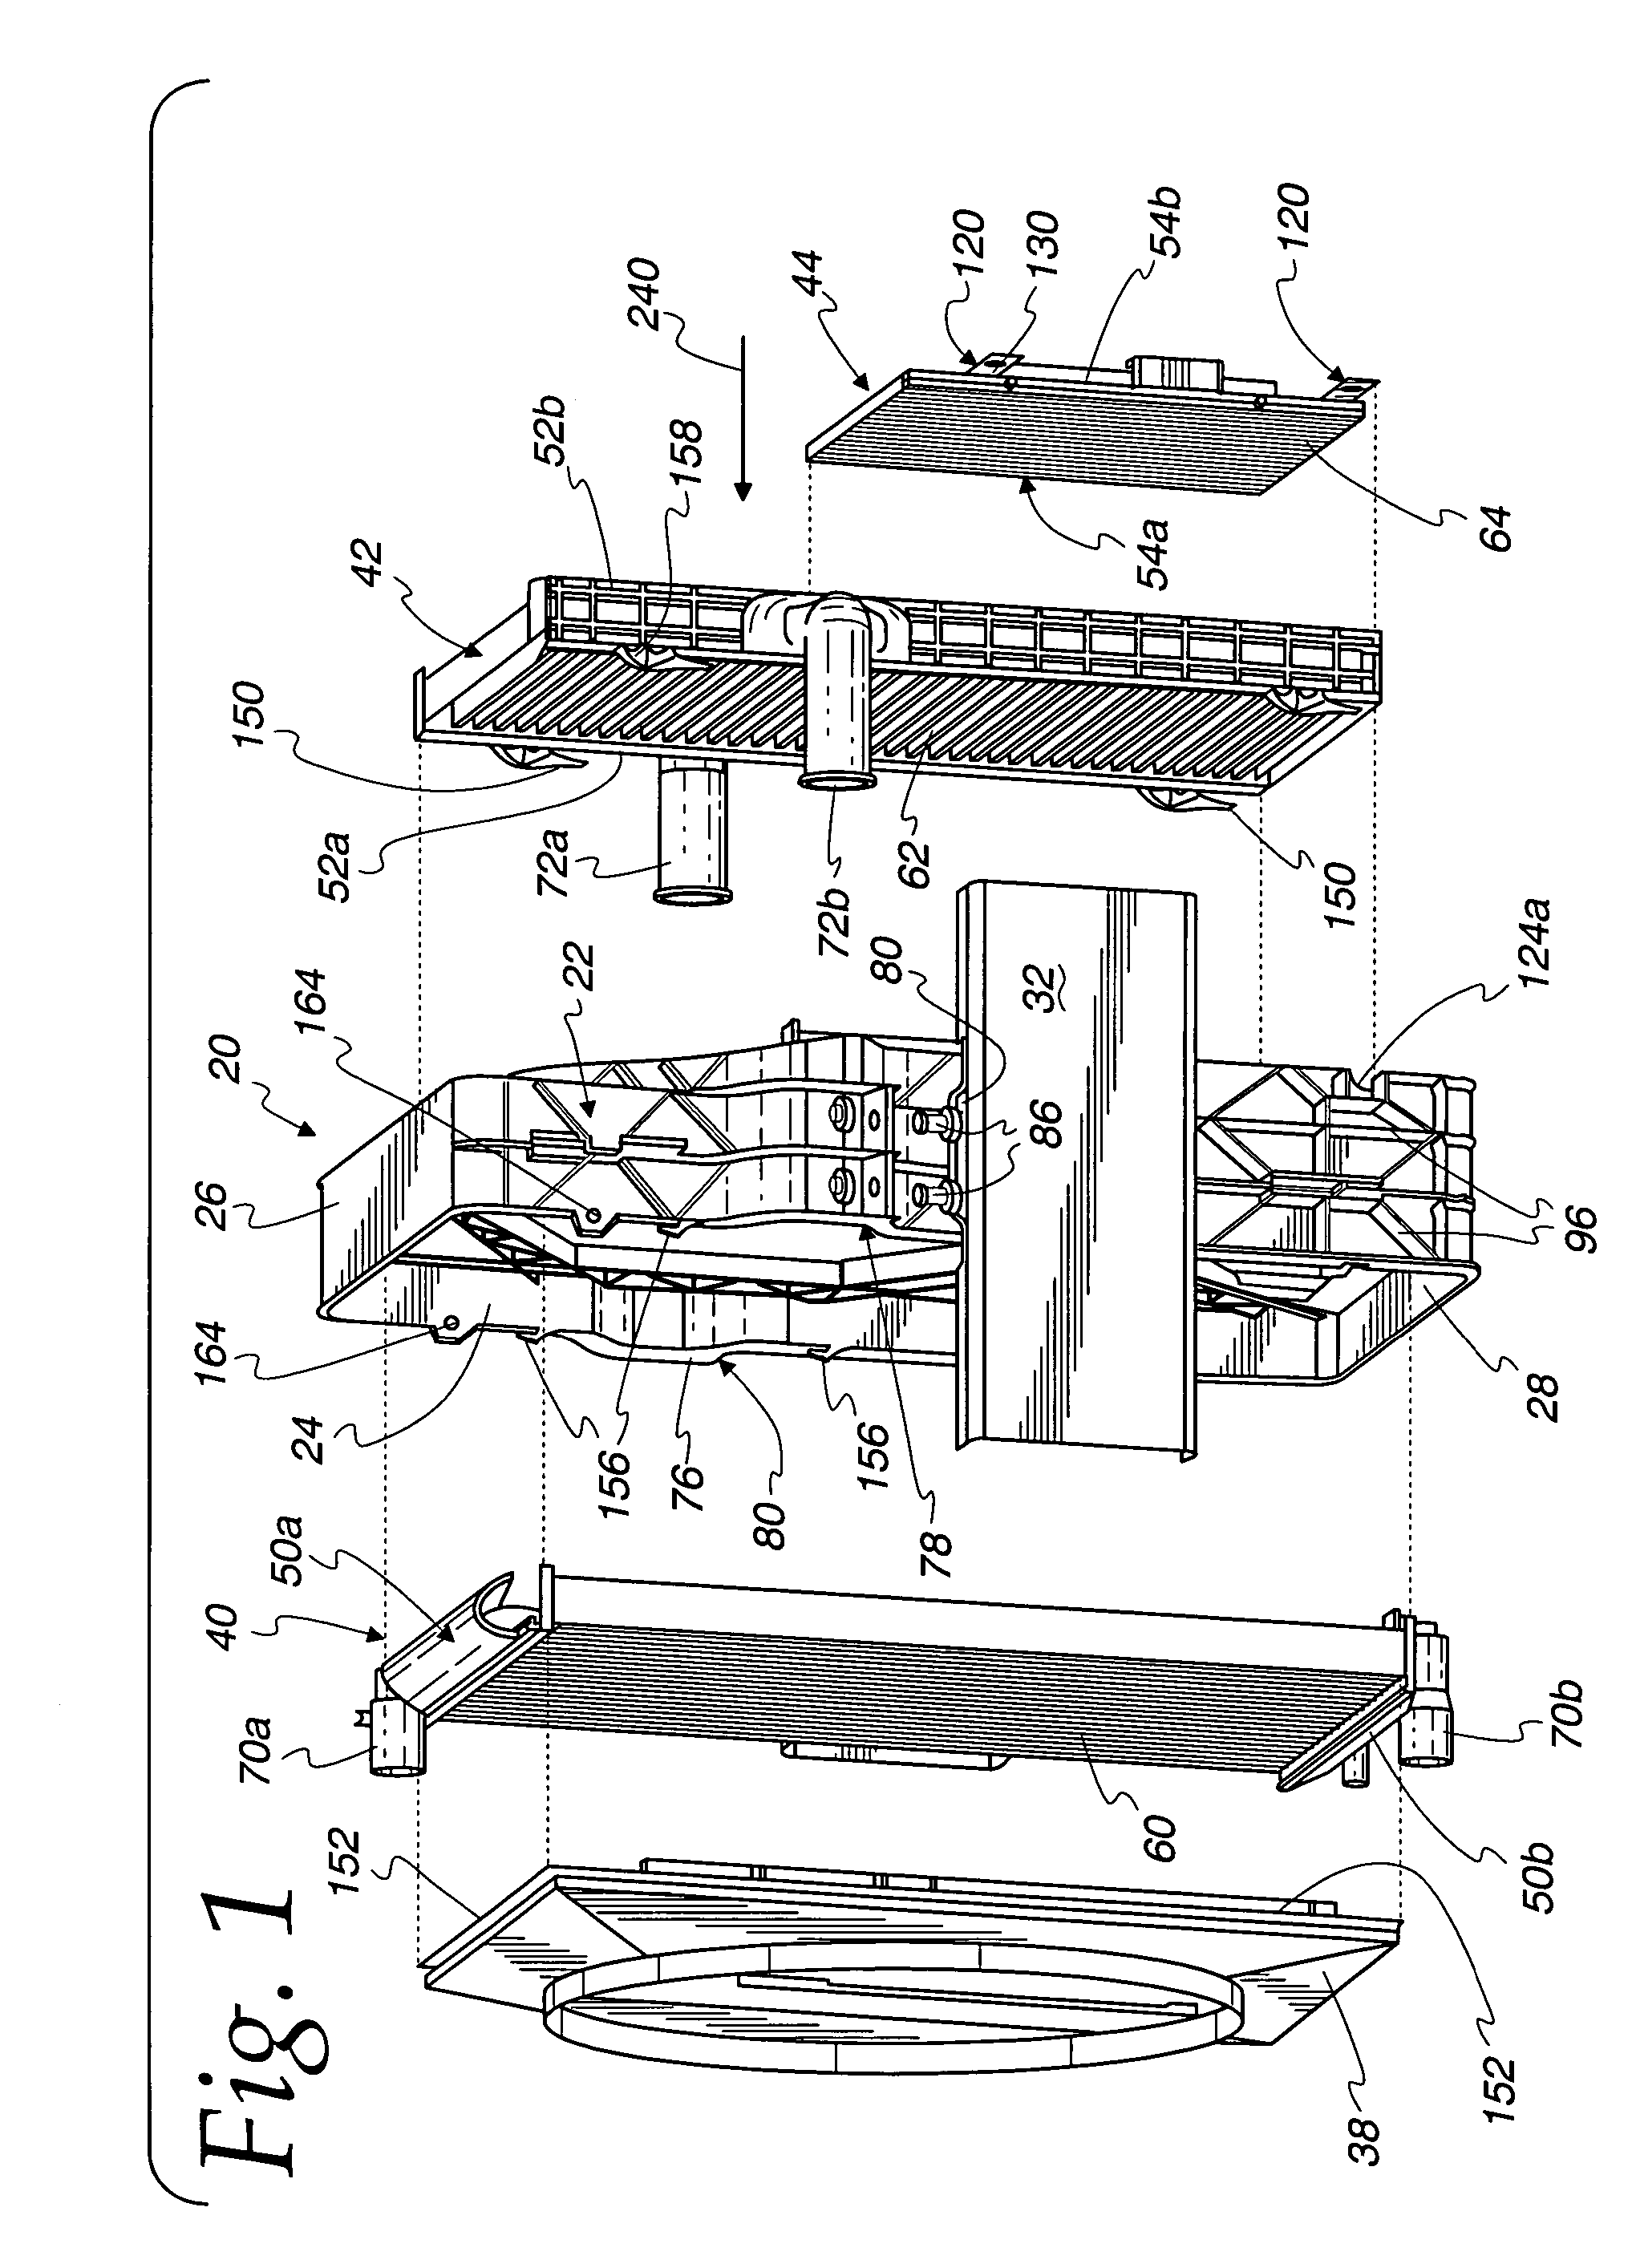 Frame for multiple vehicle heat exchangers